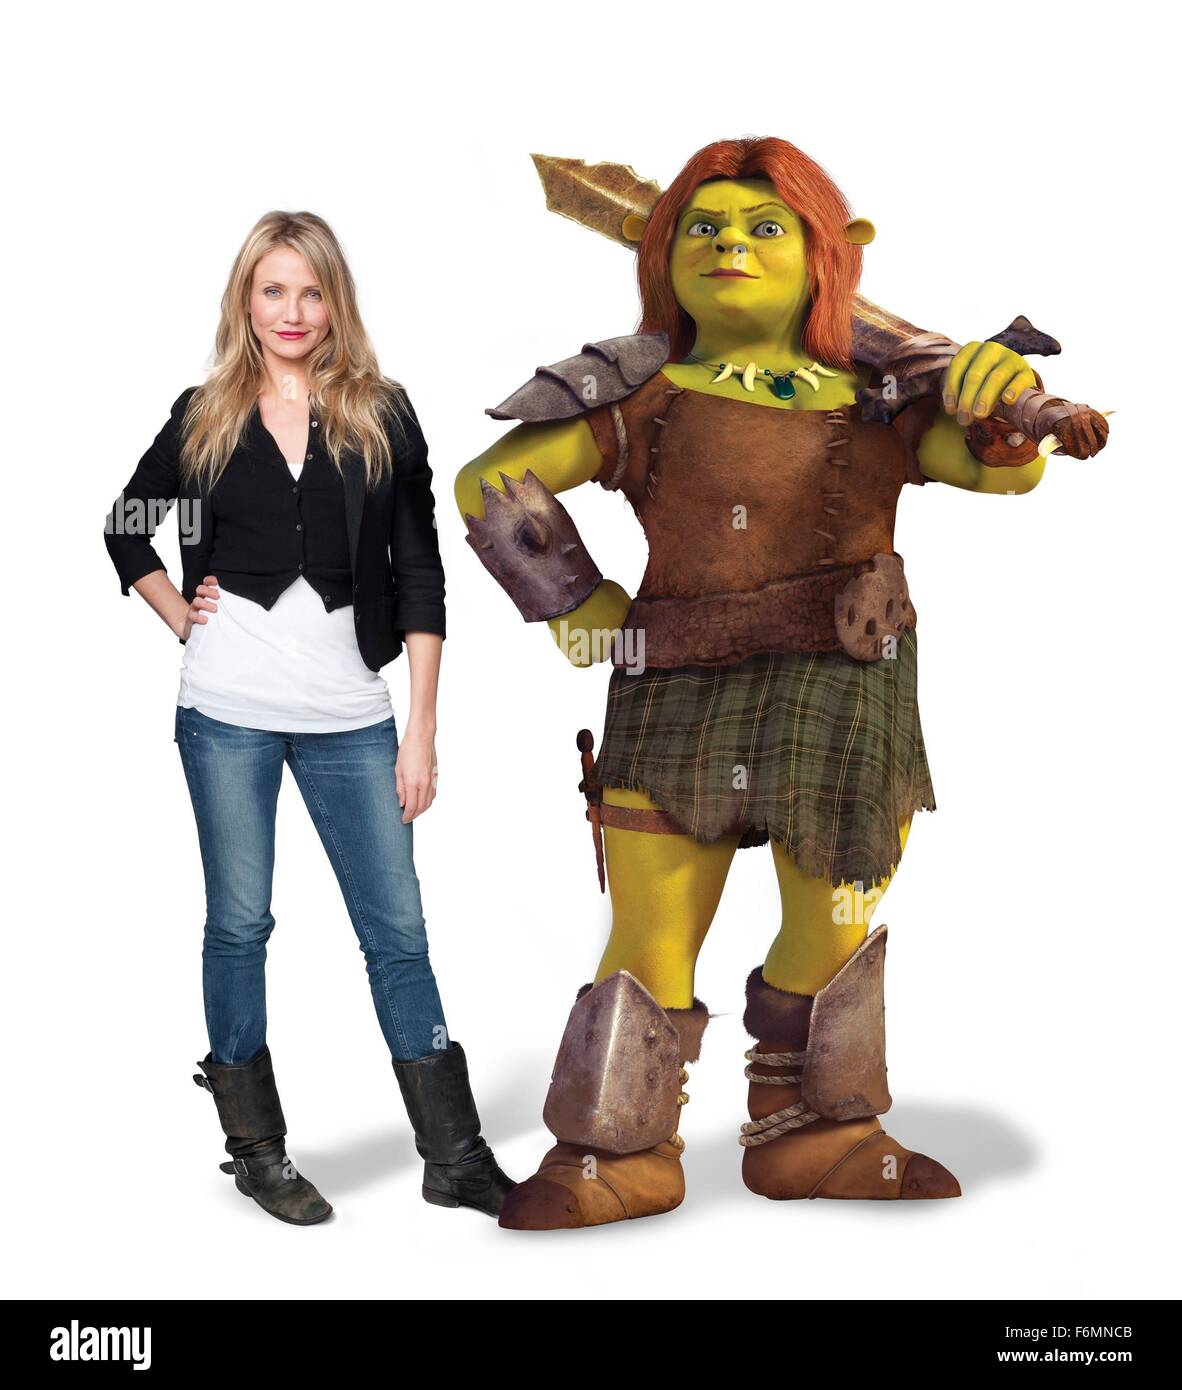 RELEASE DATE: May 21, 2010. MOVIE TITLE: Shrek Forever After. STUDIO: DreamWorks. PLOT: The further adventures of the giant green ogre, Shrek, living in the land of Far, Far Away. PICTURED: CAMERON DIAZ as Princess Fiona. Stock Photo